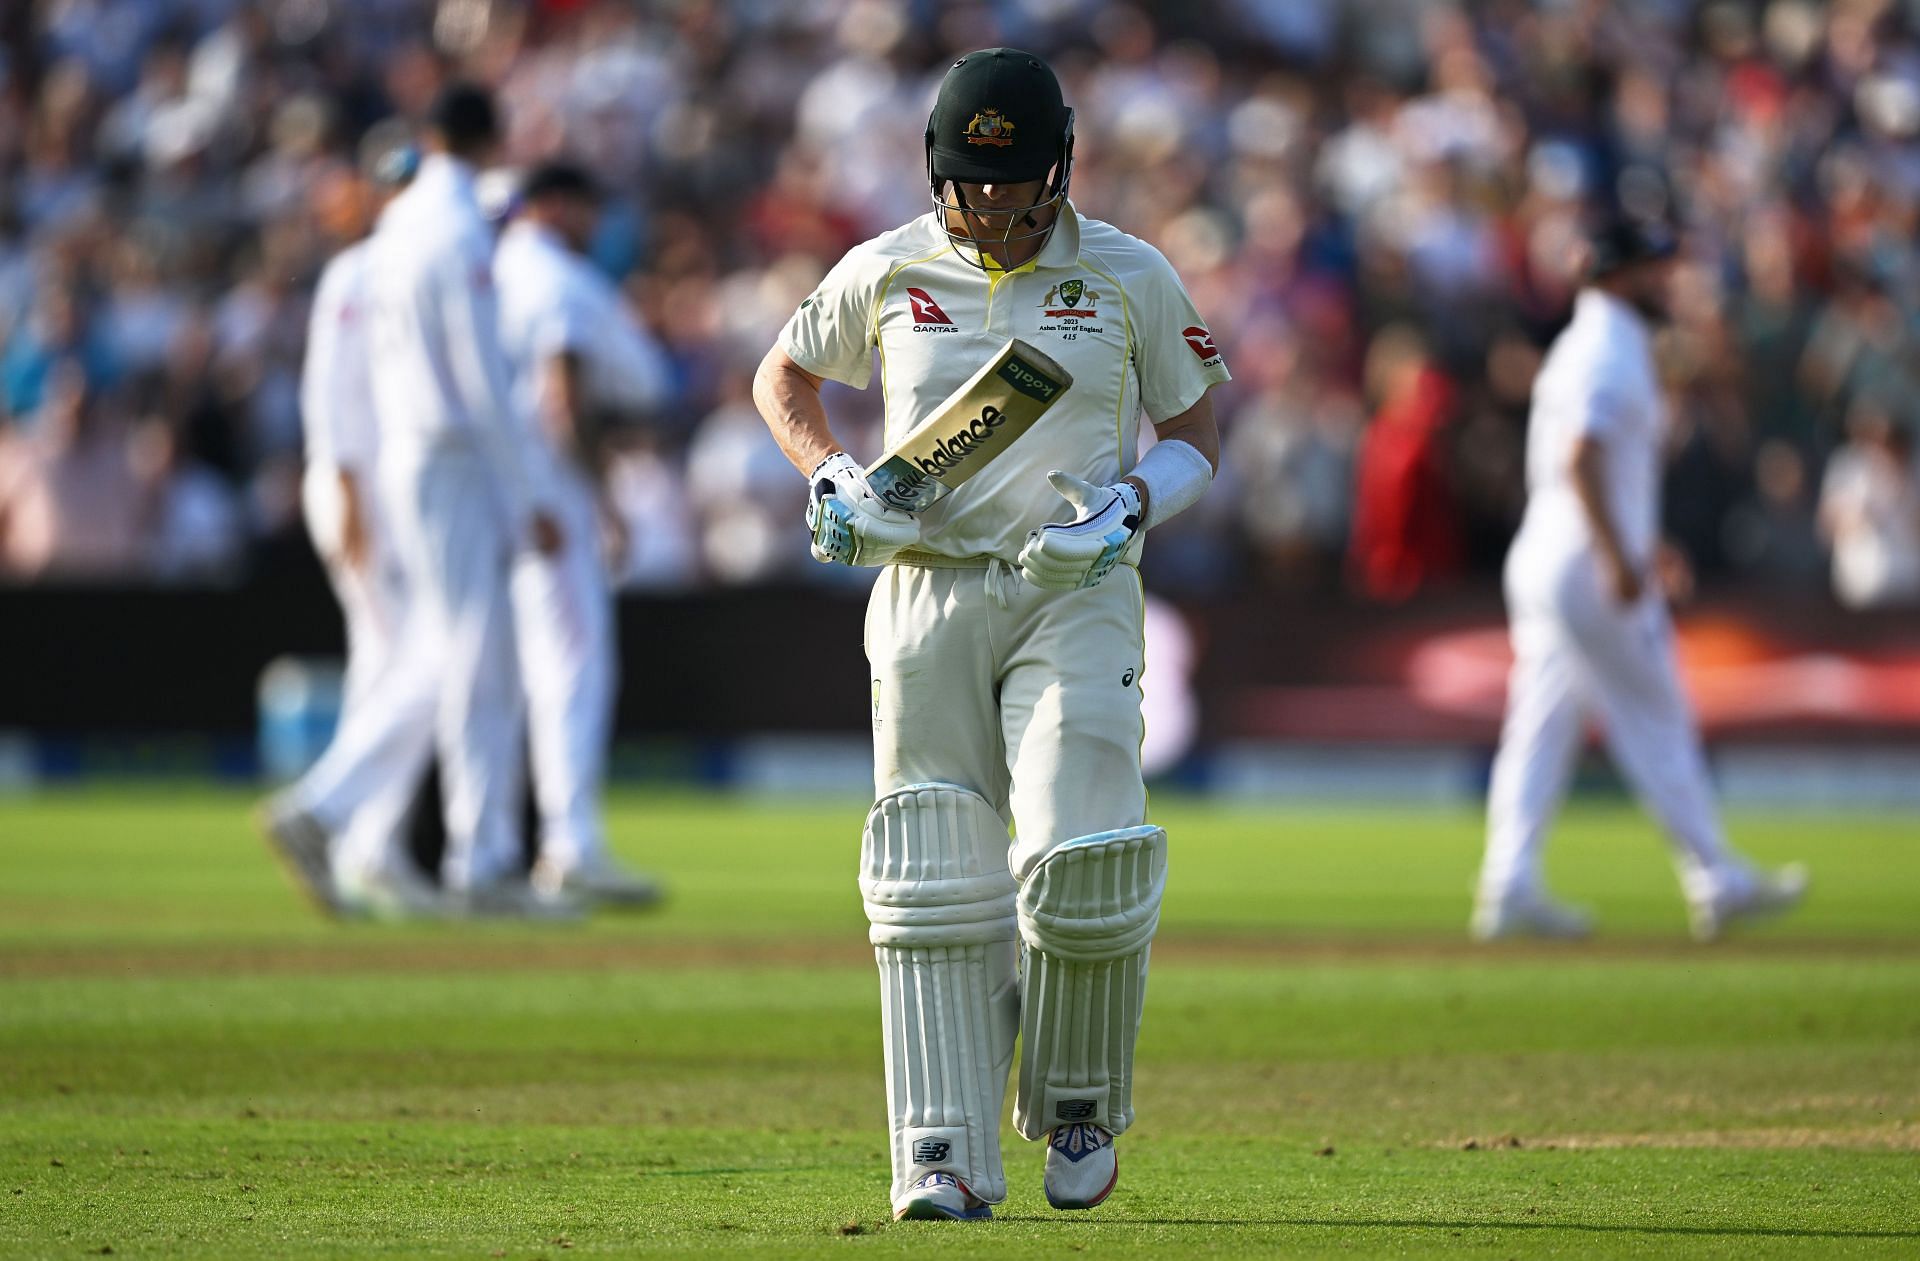 Steve Smith walks off after being dismissed by Stuart Broad. (Credits: Getty)